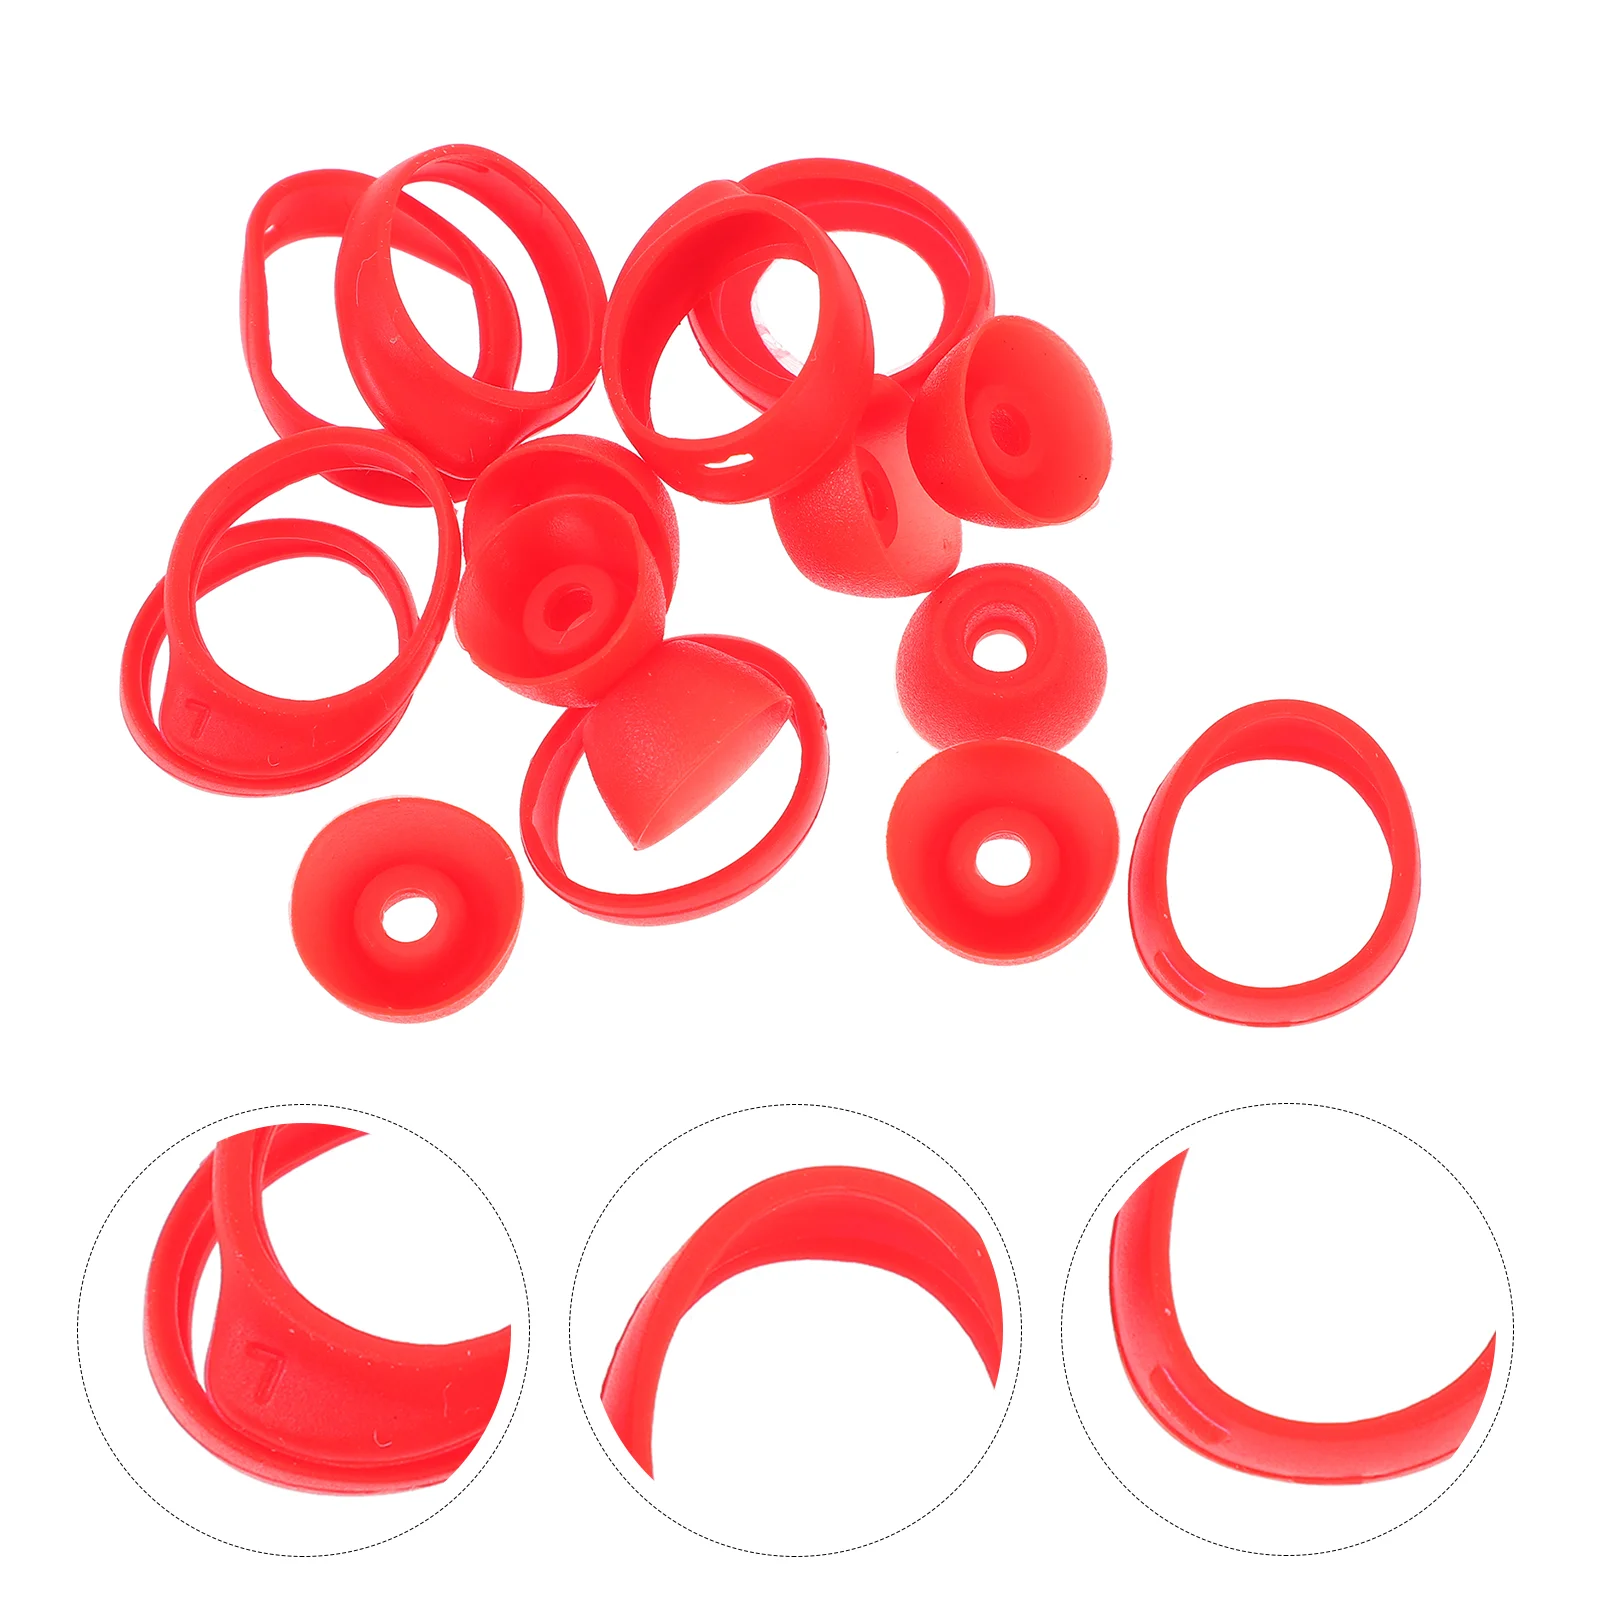 

16 Replacement Ear Tips Compatible Buds/ Buds+ - Silicone Earbuds Eartips Wingtips Earhooks Earpads Earphones Tips Cover ( Red )